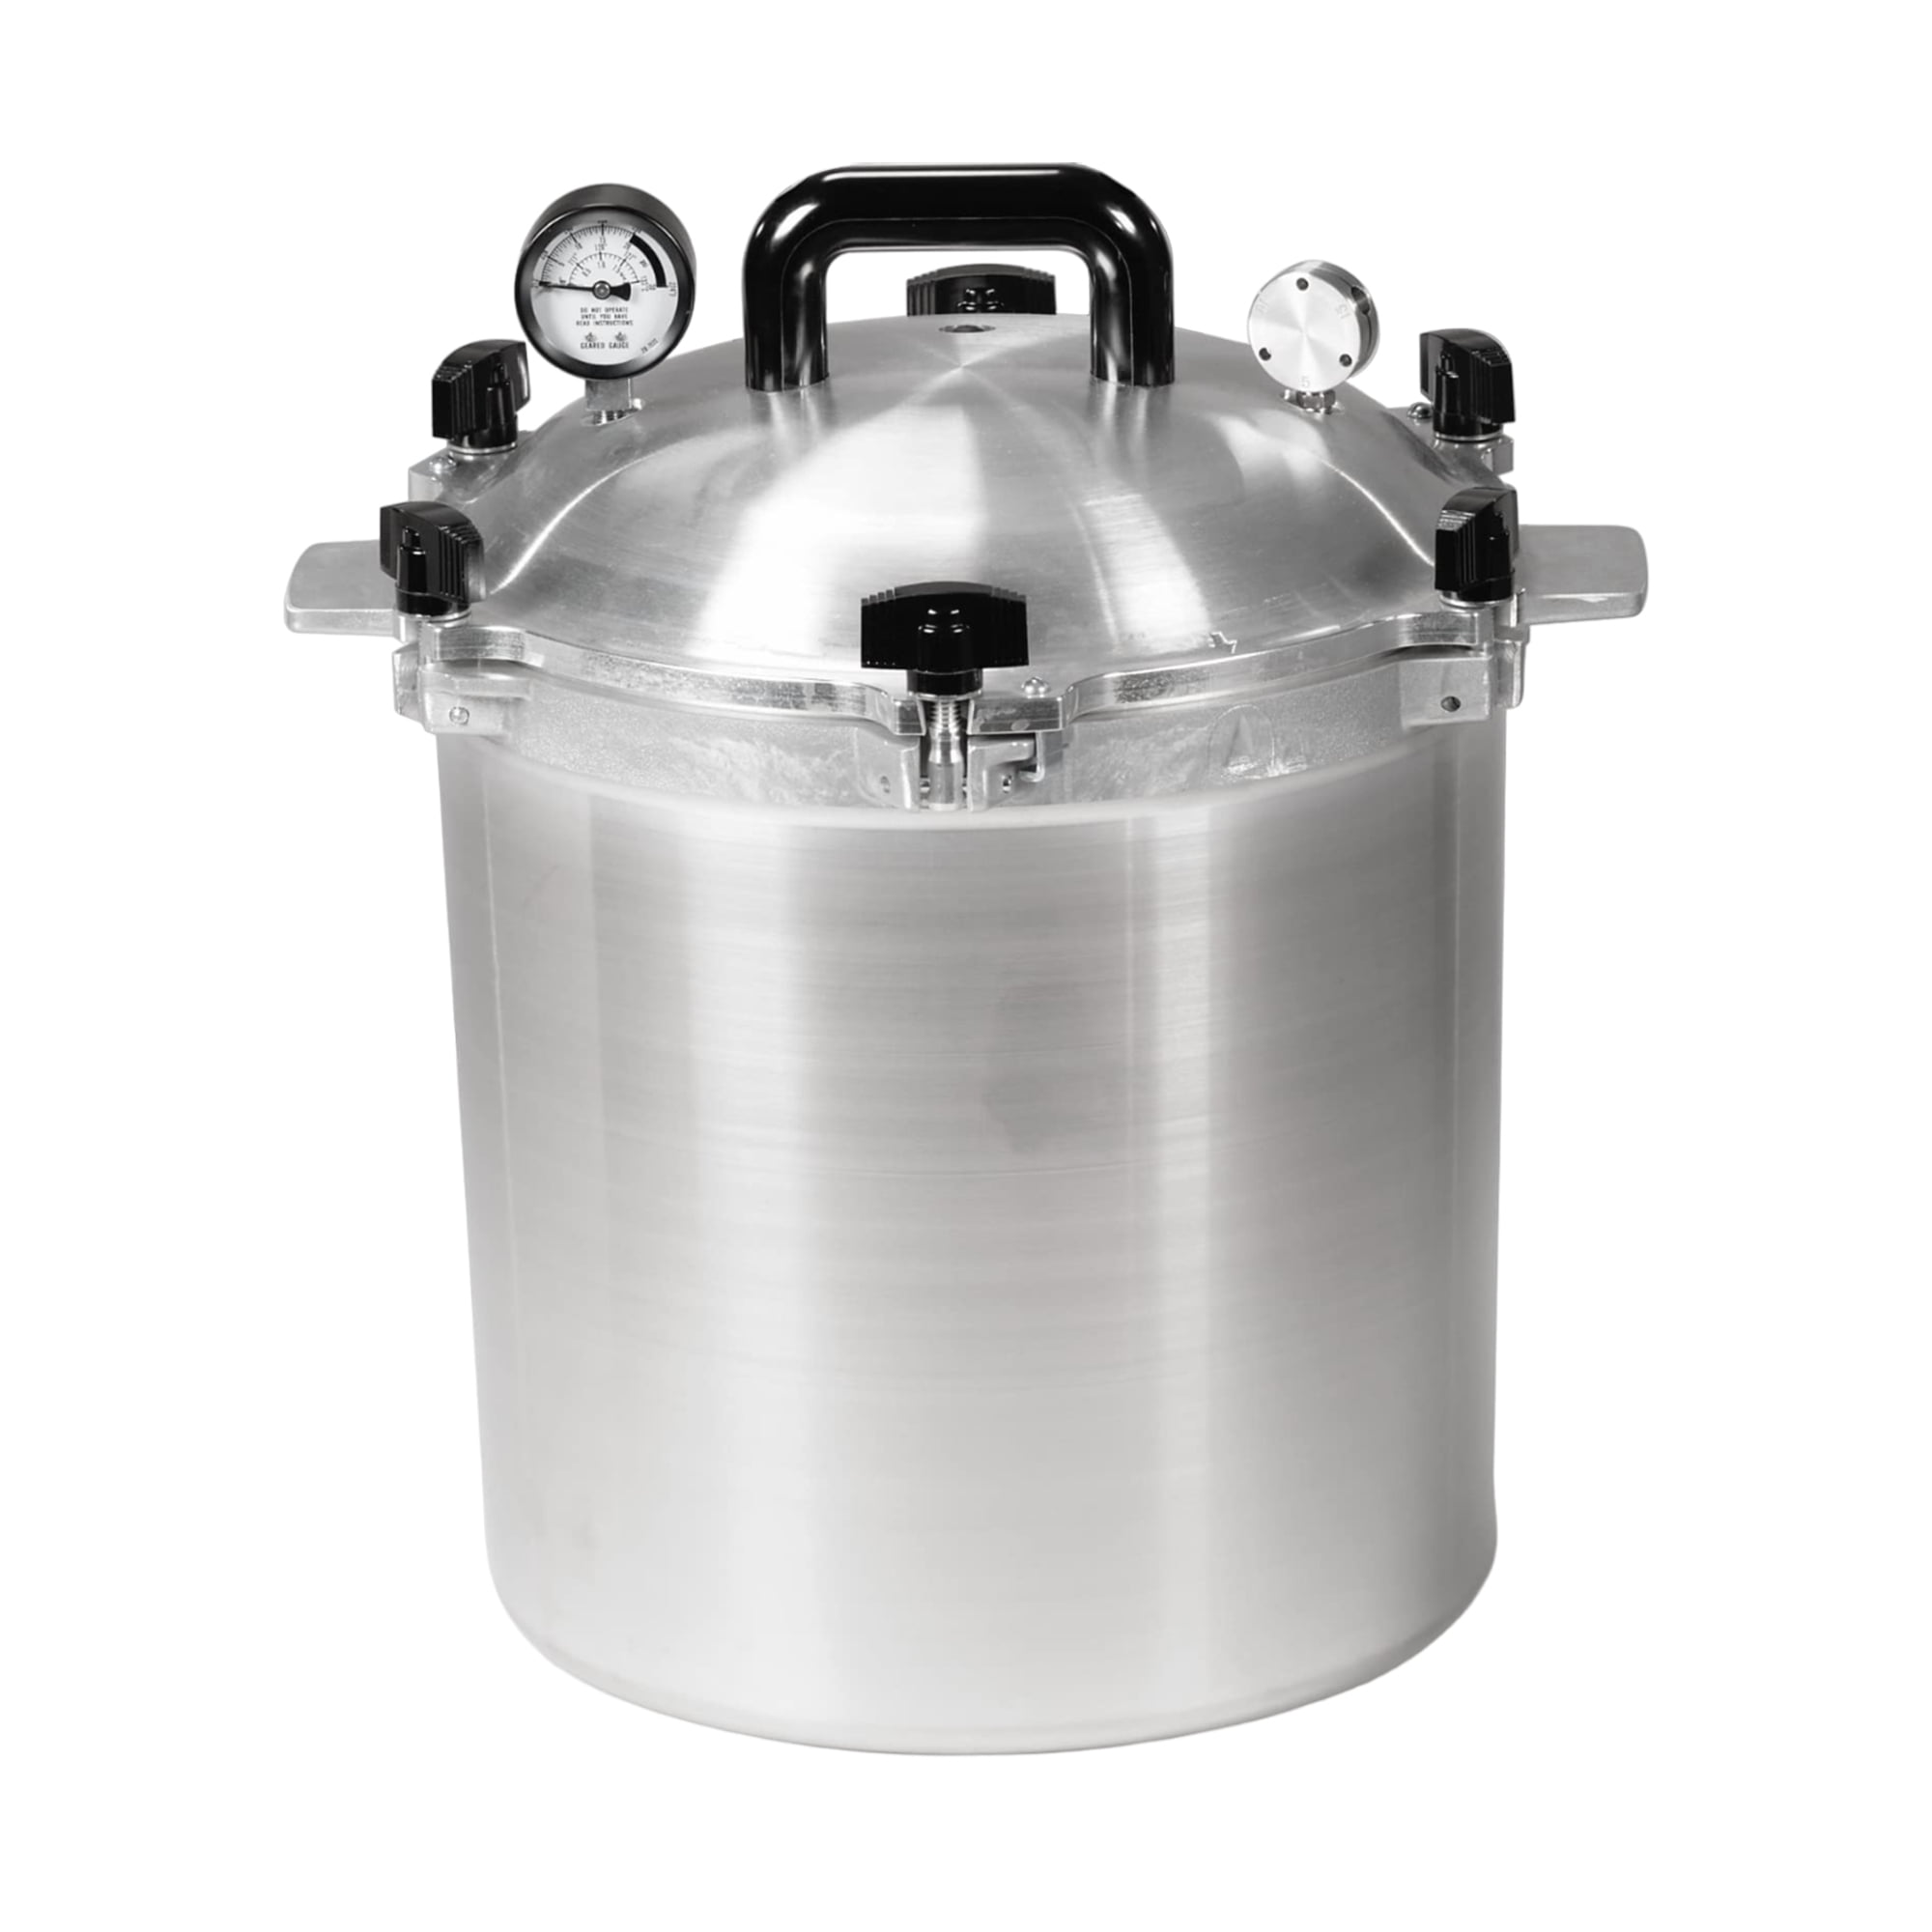 Mirro 92116 Polished Aluminum 5 / 10 / 15-psi Pressure Cooker / Canner Cookware, 16-Quart, Silver